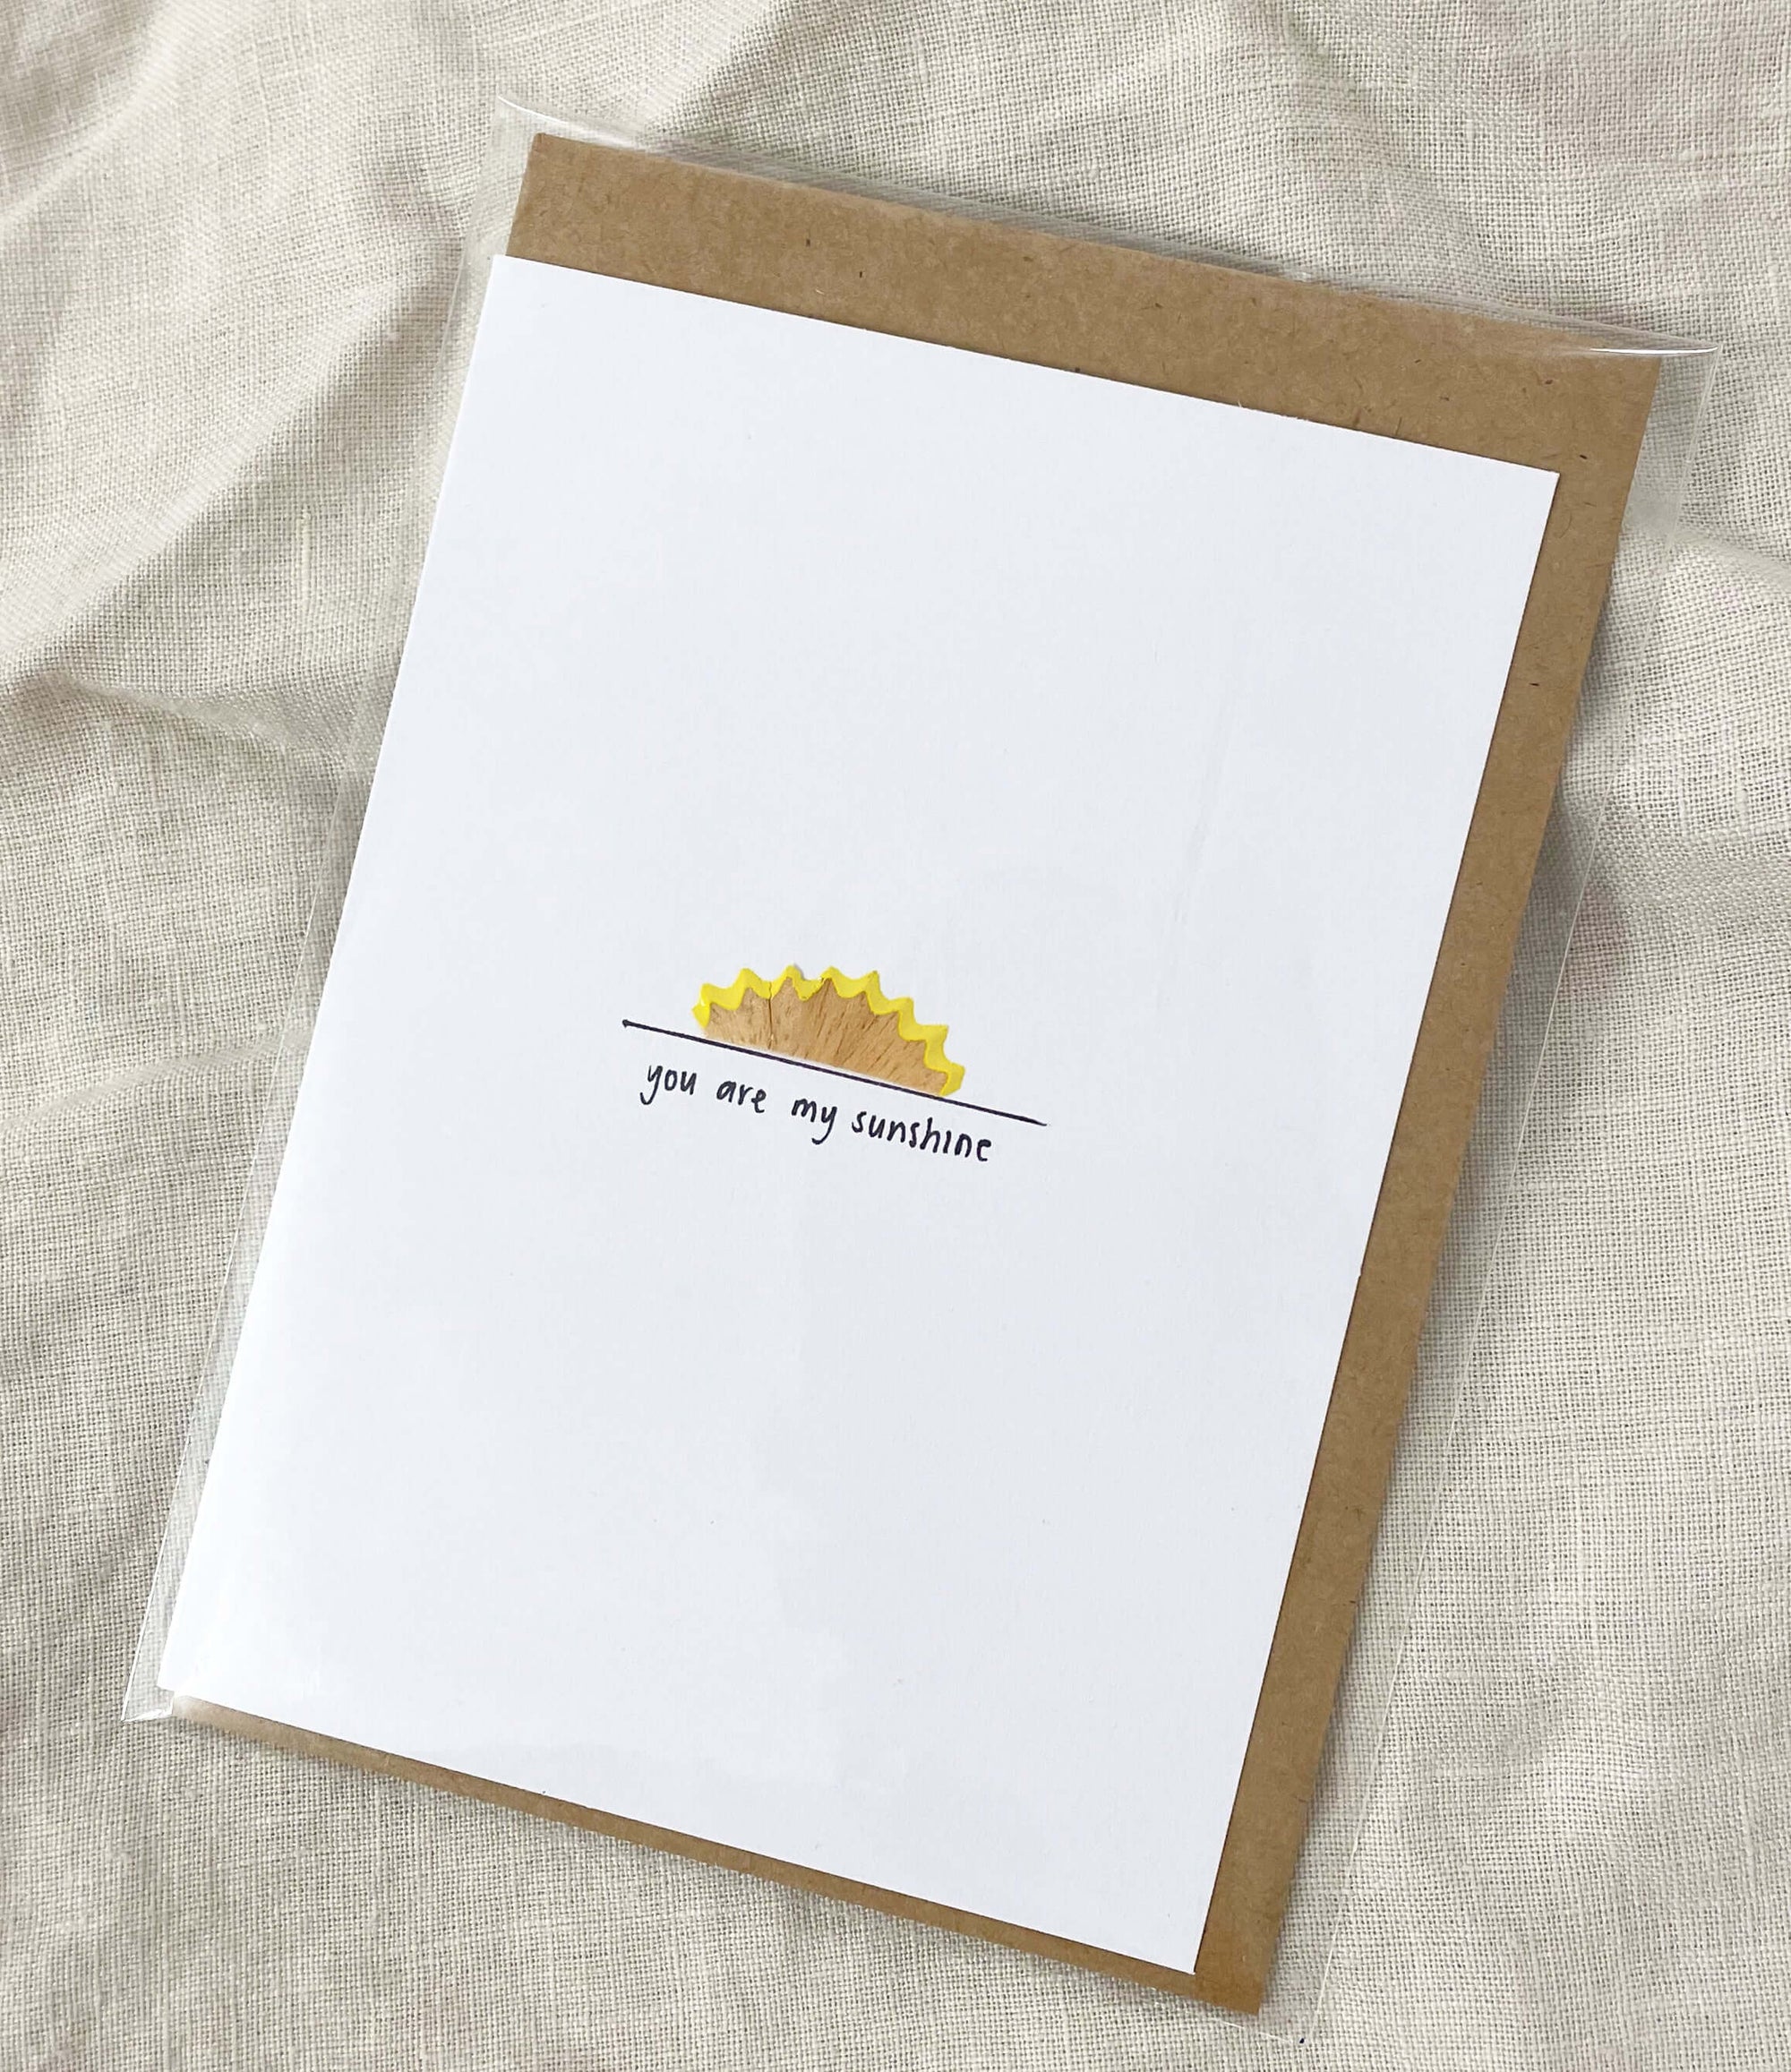 Greeting Card That Has On The Front "You Are My Sunshine" Lettering. 